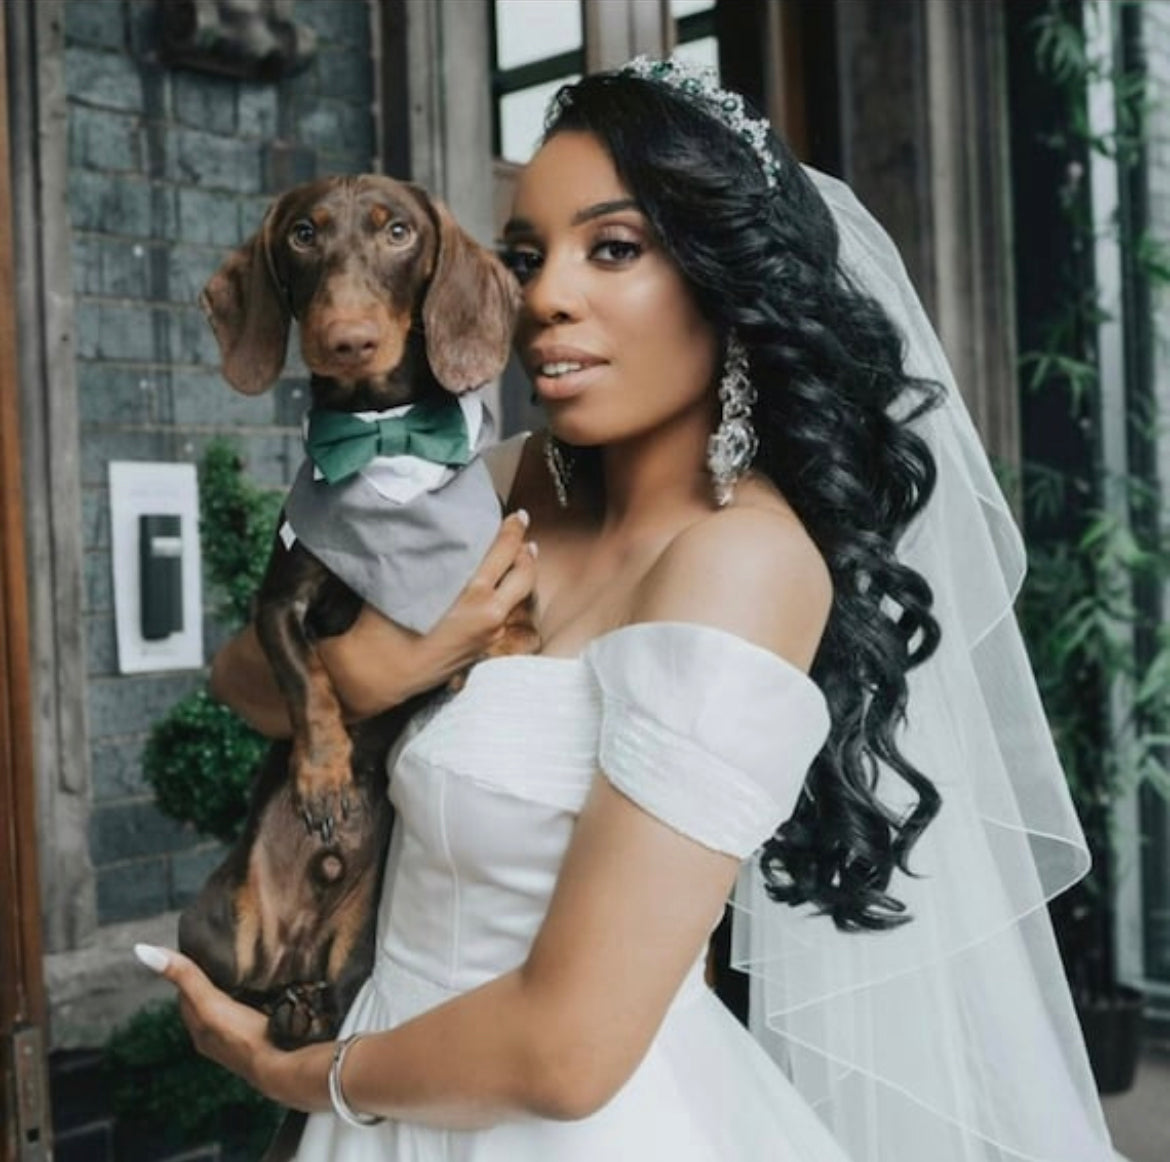 Beautiful wedding picture with a dog wearing a dog tuxedo